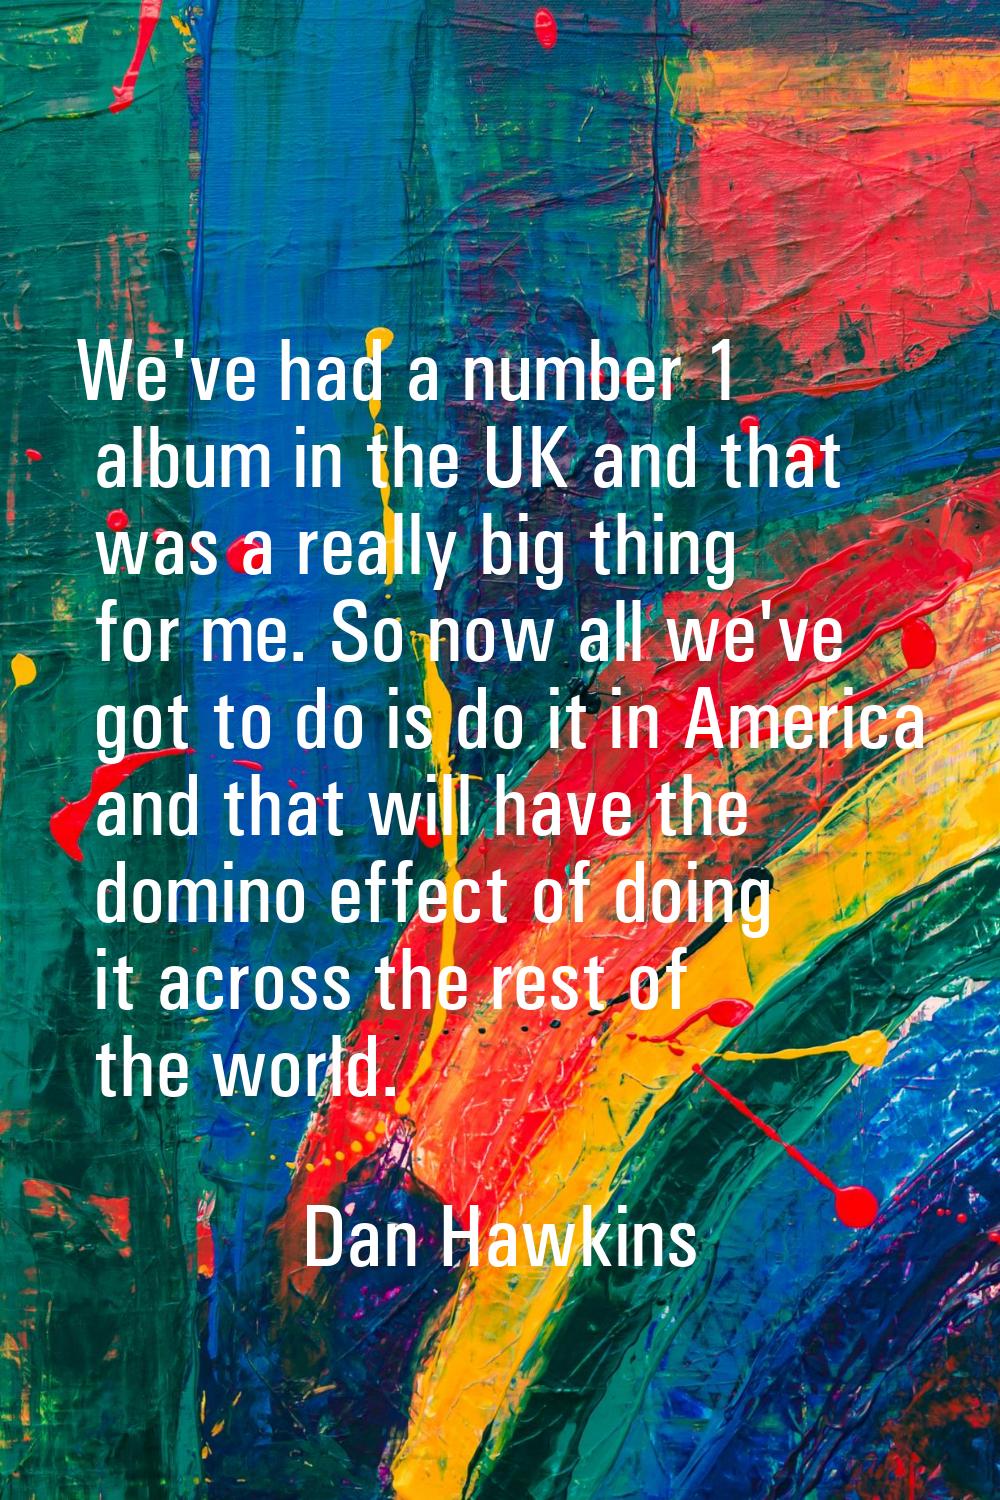 We've had a number 1 album in the UK and that was a really big thing for me. So now all we've got t